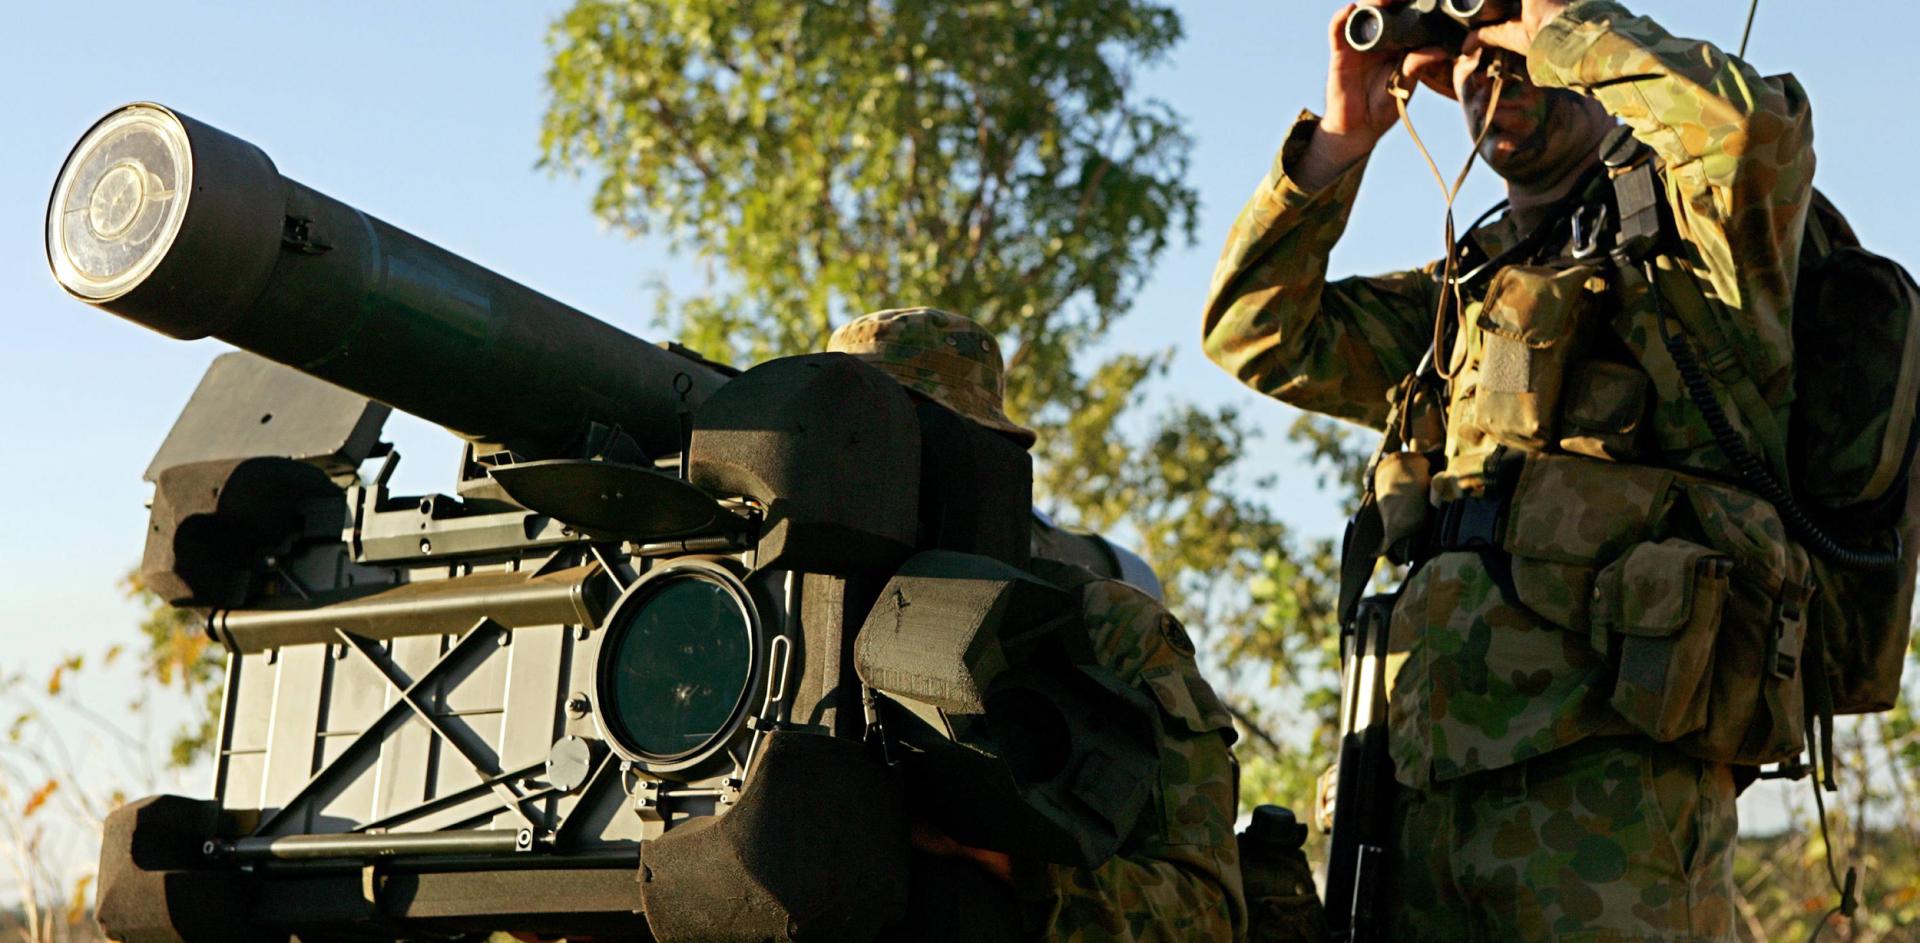 Two soldiers watching something in the distance with binoculars and machinery